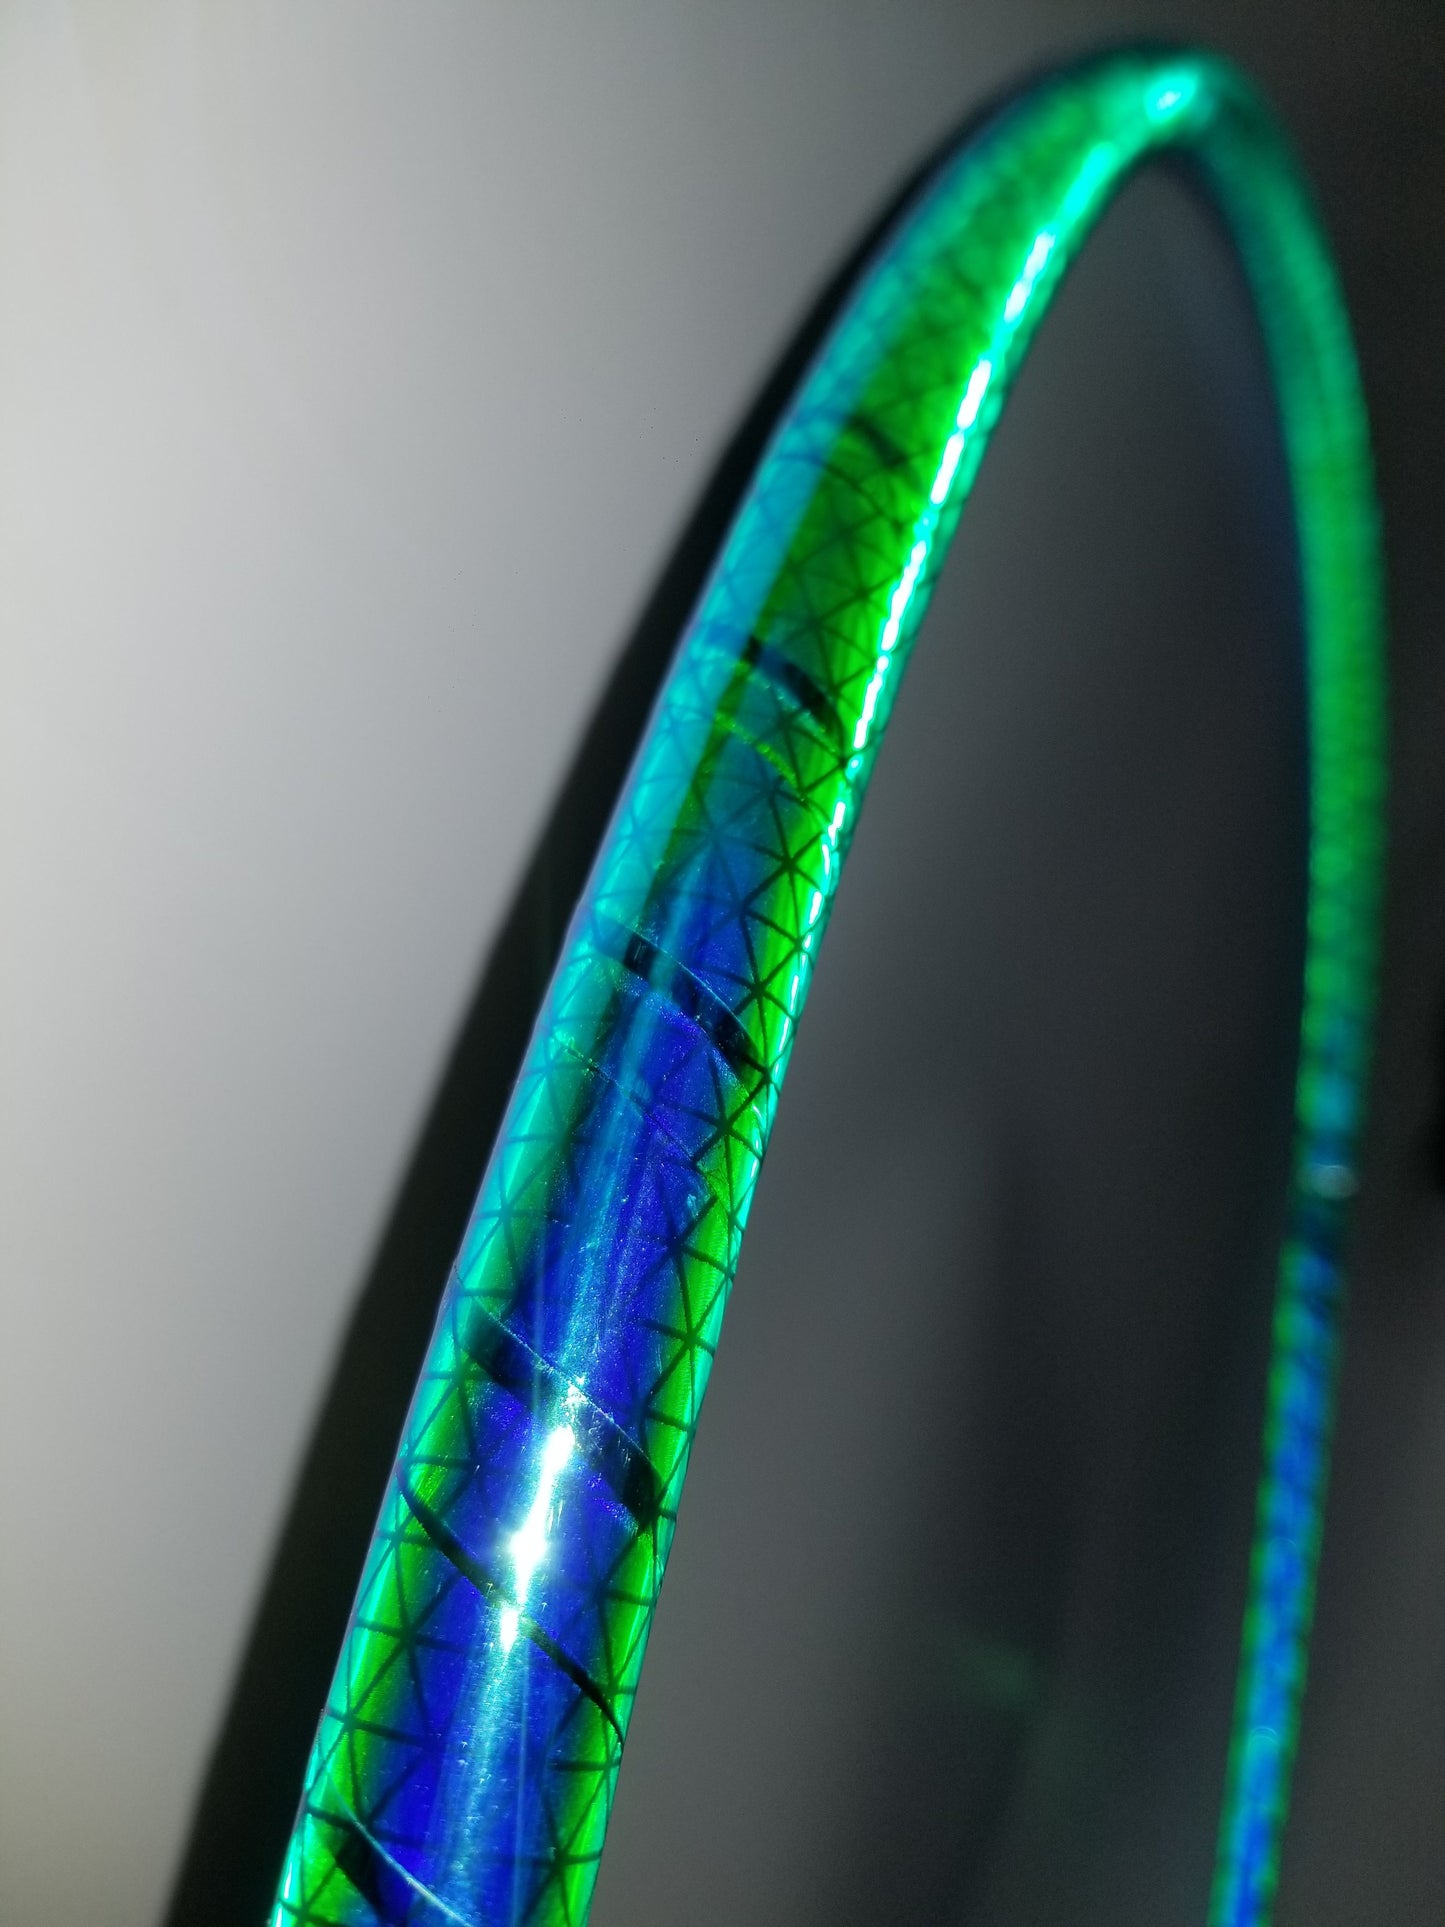 Tropical Fusion Reflective Color Morph Taped Hoop